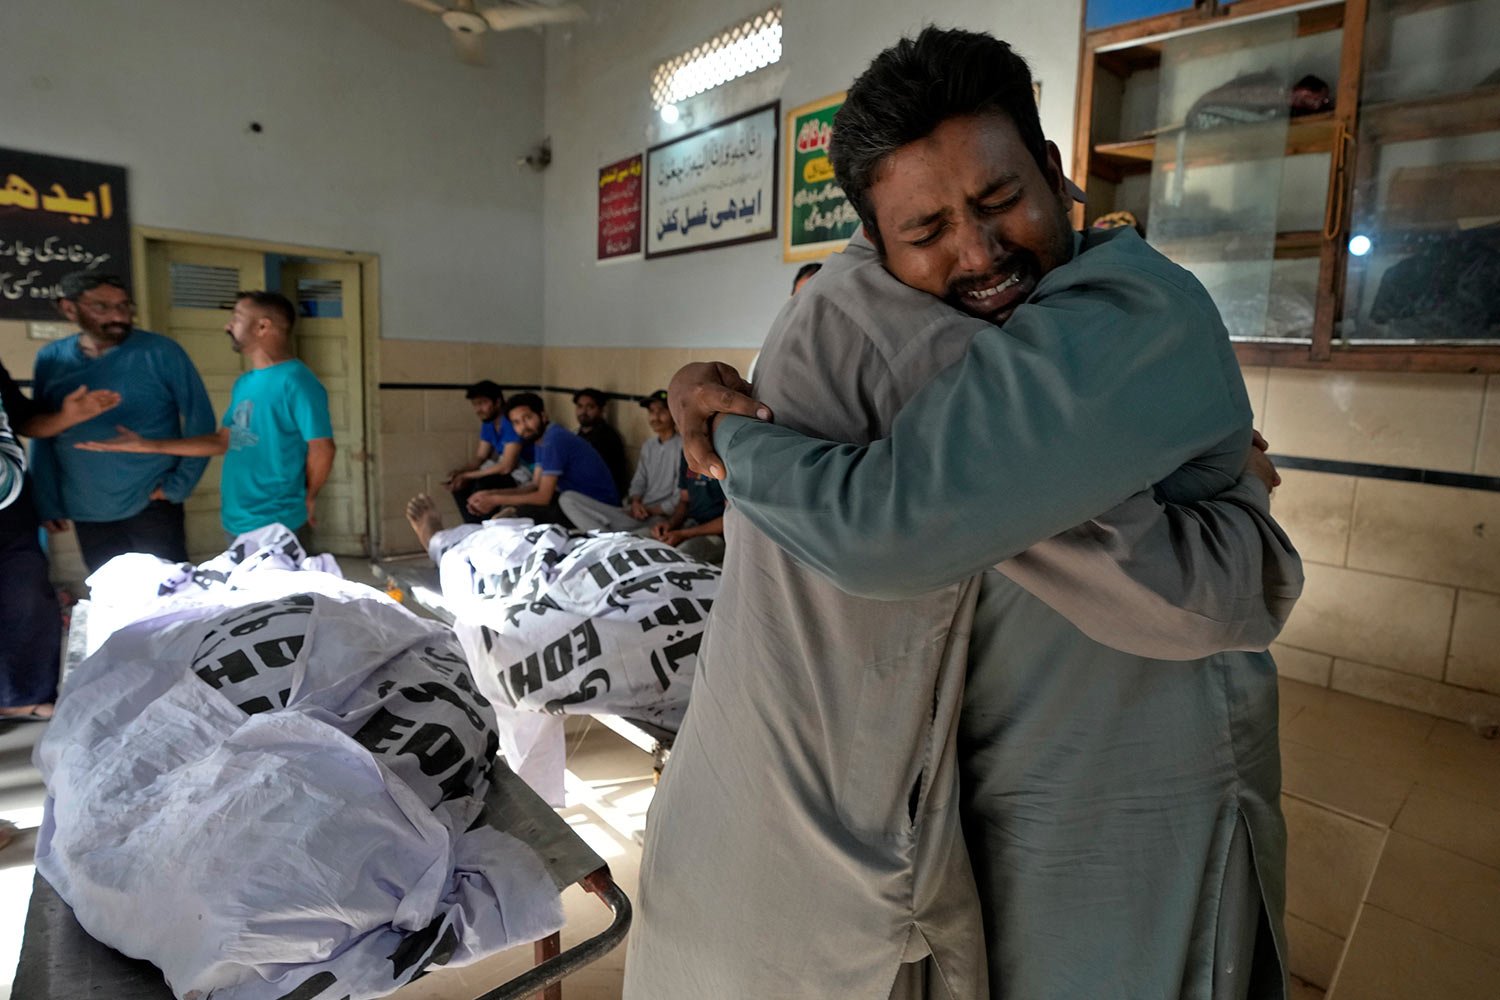  People mourn next to the bodies of firefighters, who died in a fire, at a morgue in Karachi, Pakistan, Thursday, April 13, 2023. (AP Photo/Fareed Khan) 